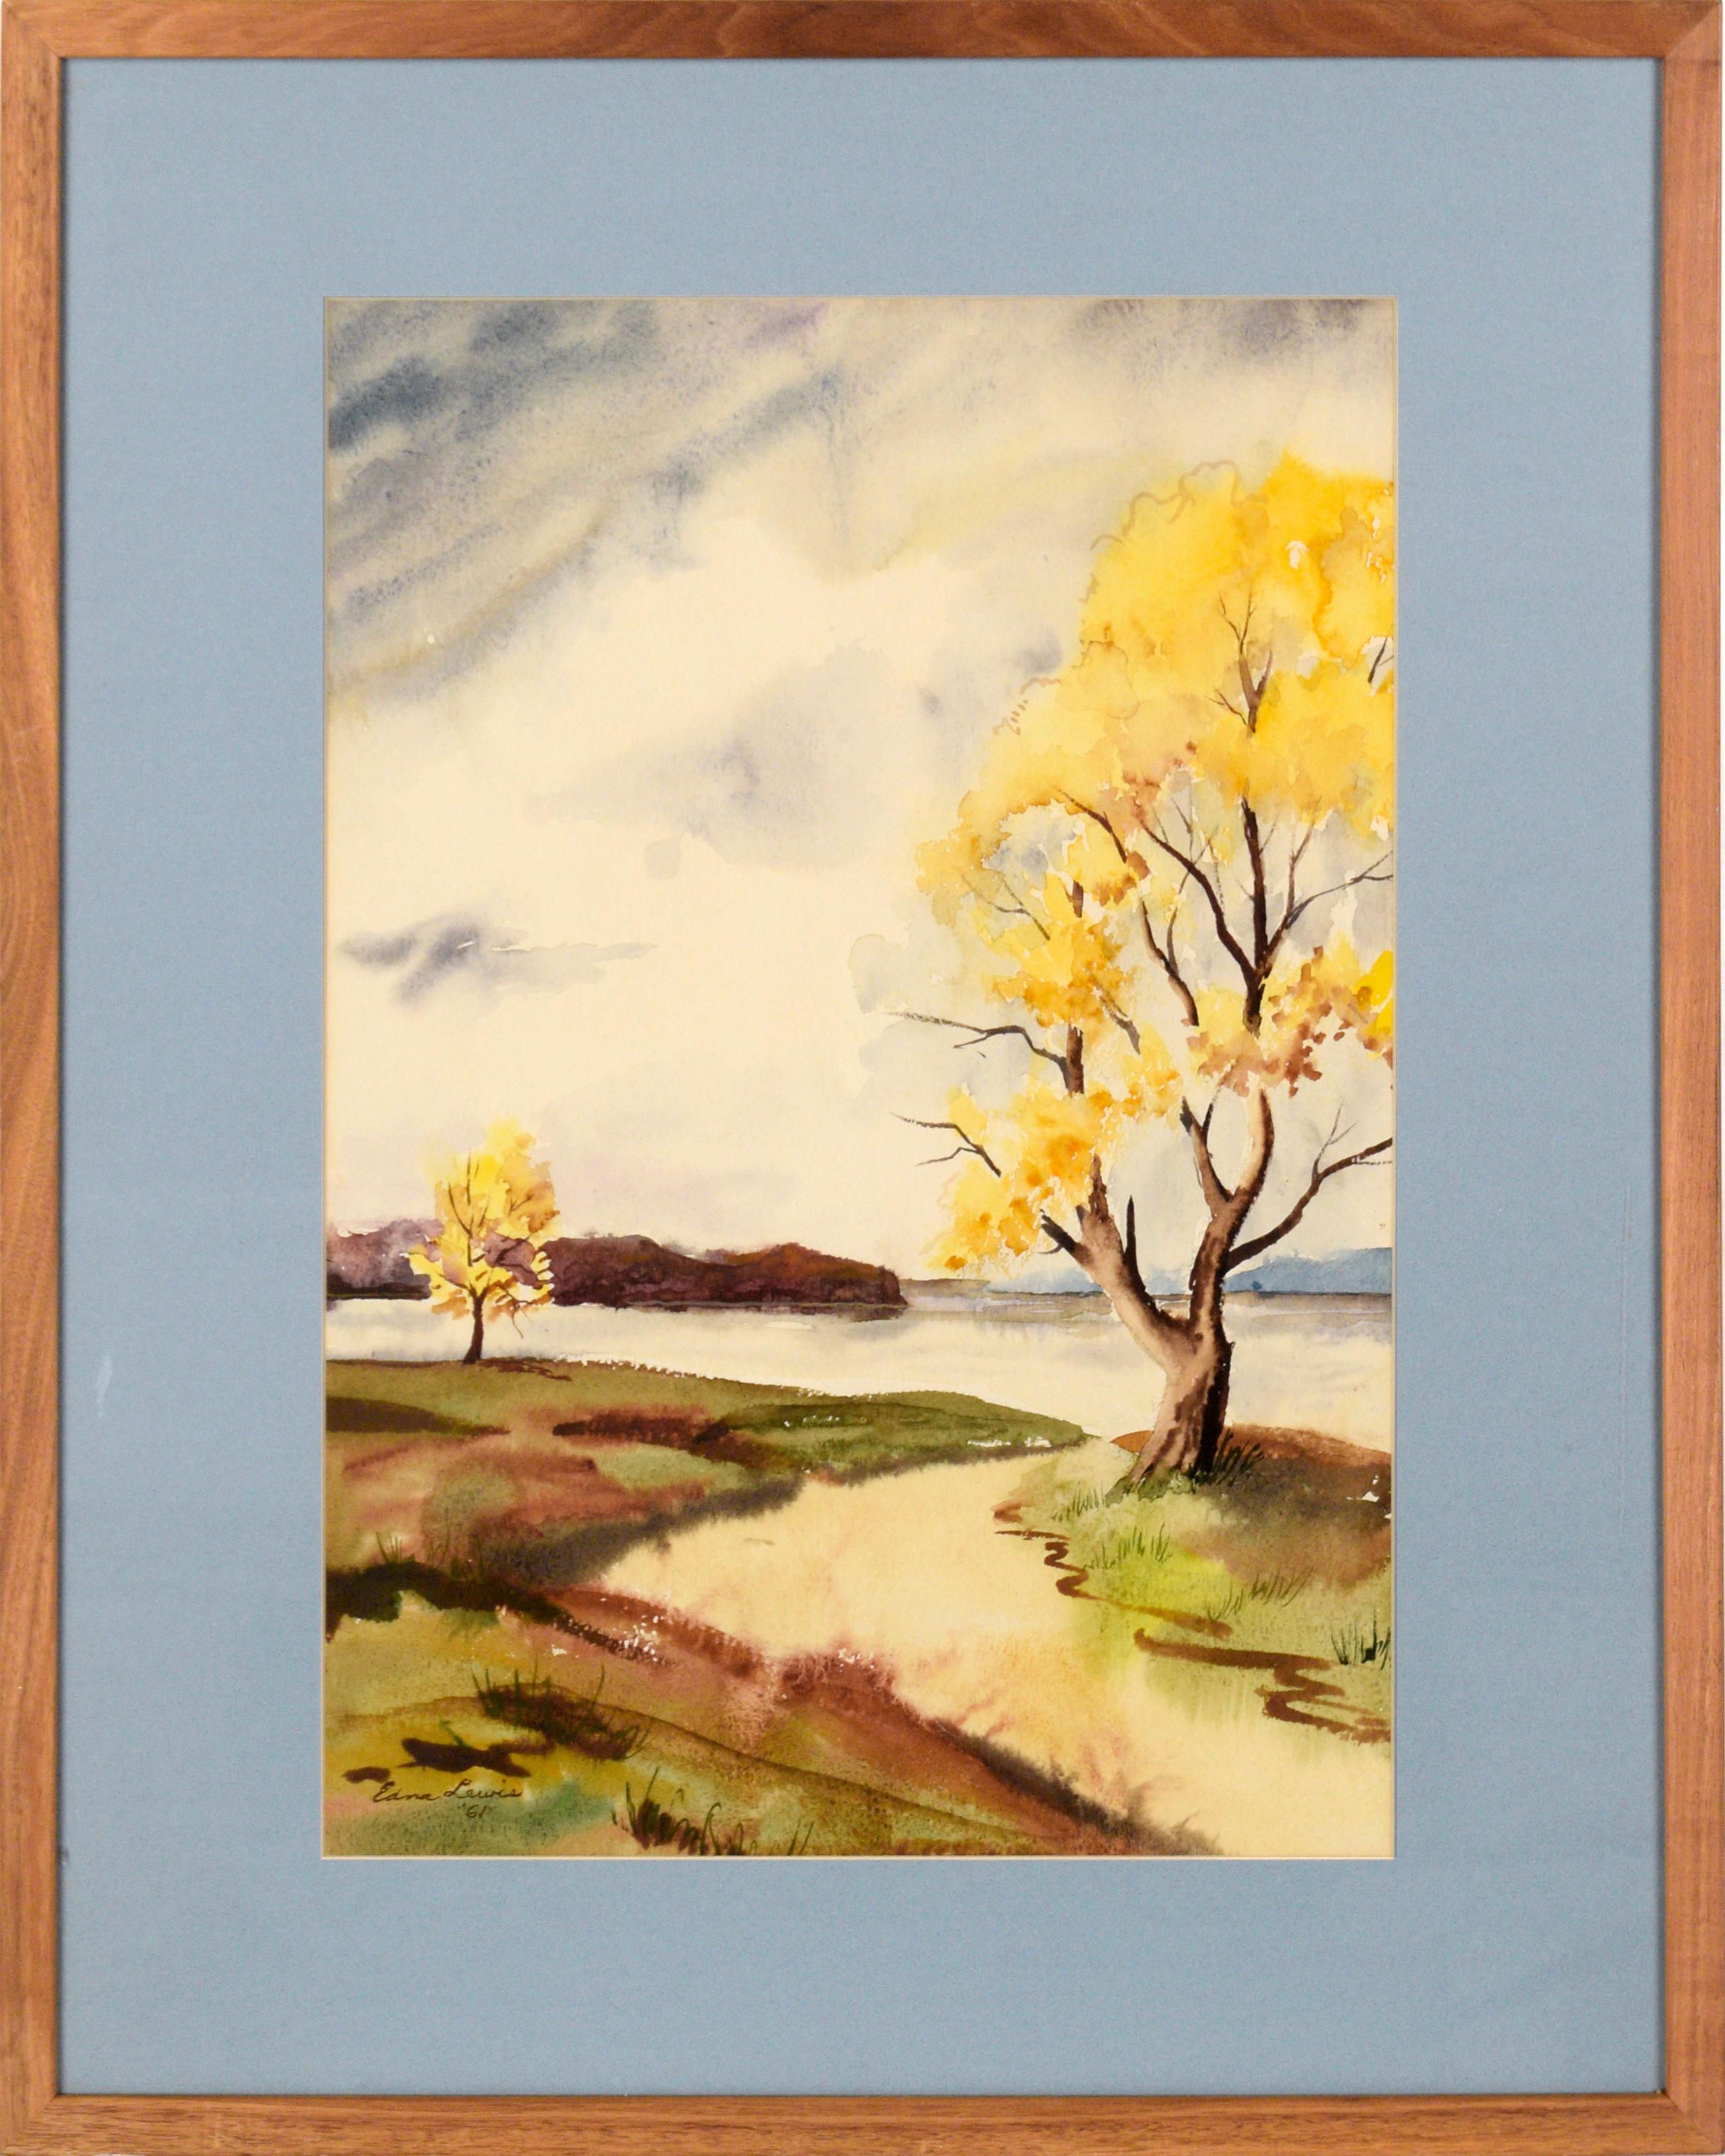 Lake Landscape with Yellow Trees - Watercolor on Paper